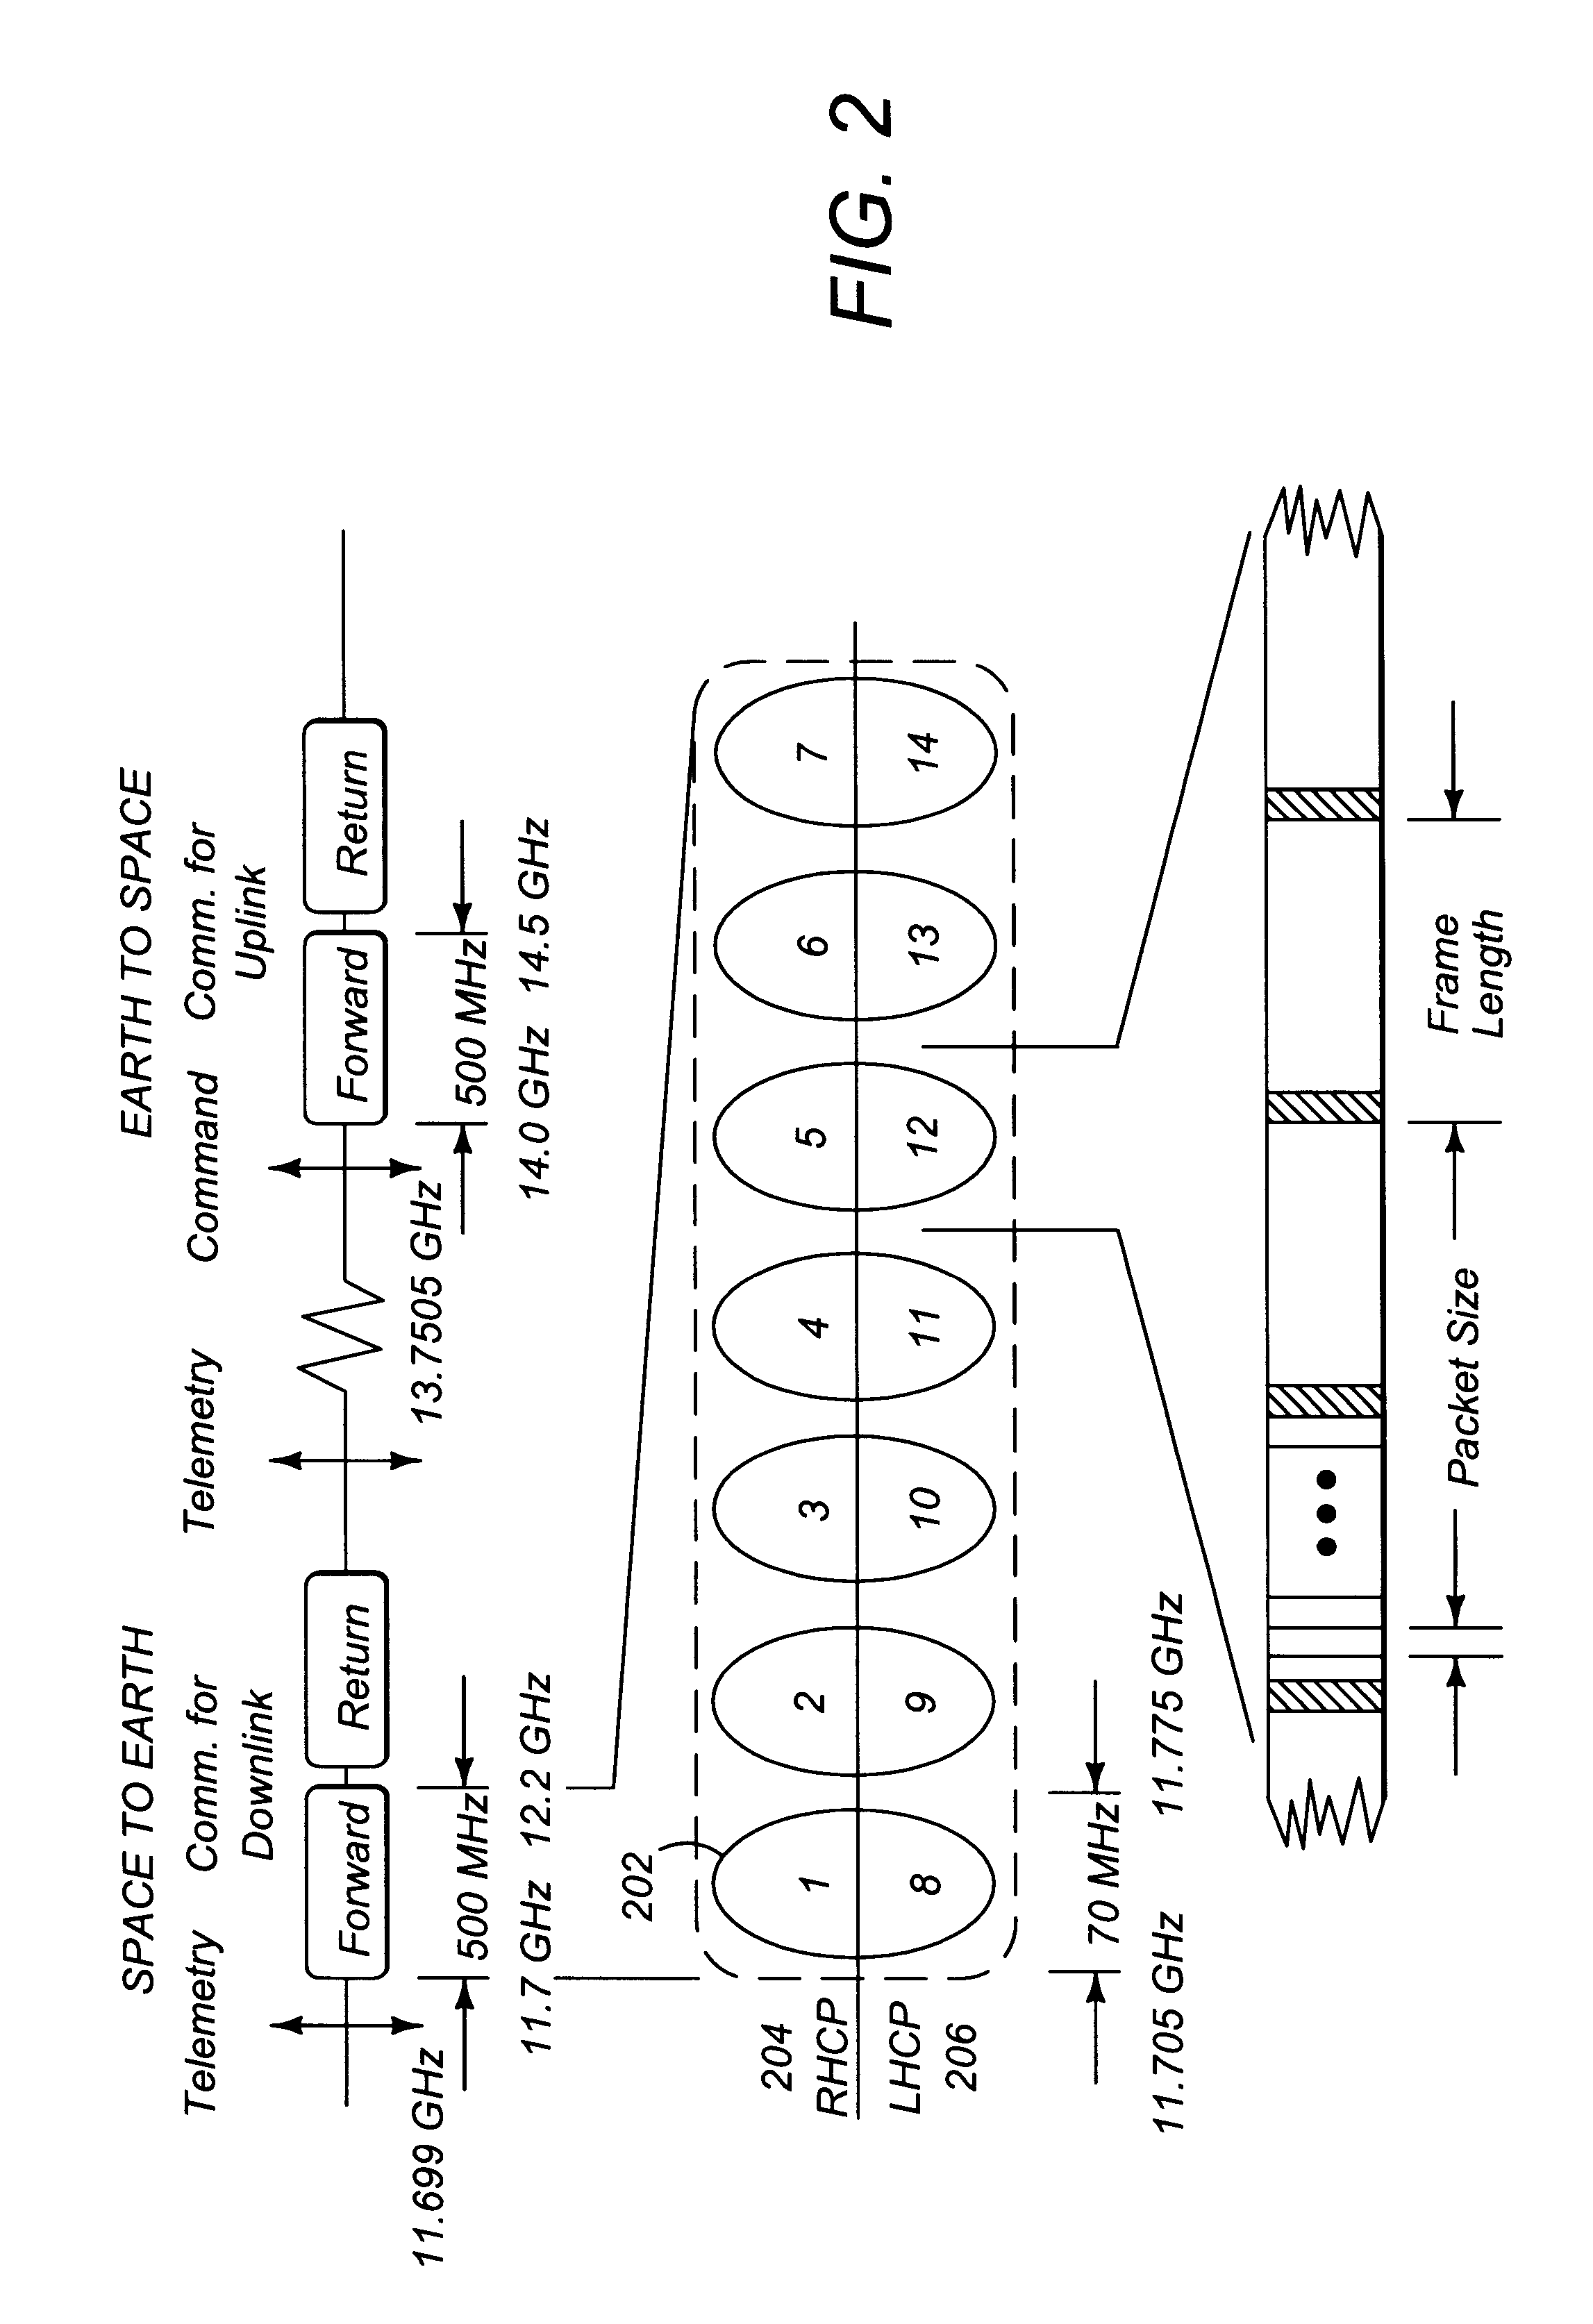 Method and apparatus for providing wideband services using medium and low earth orbit satellites